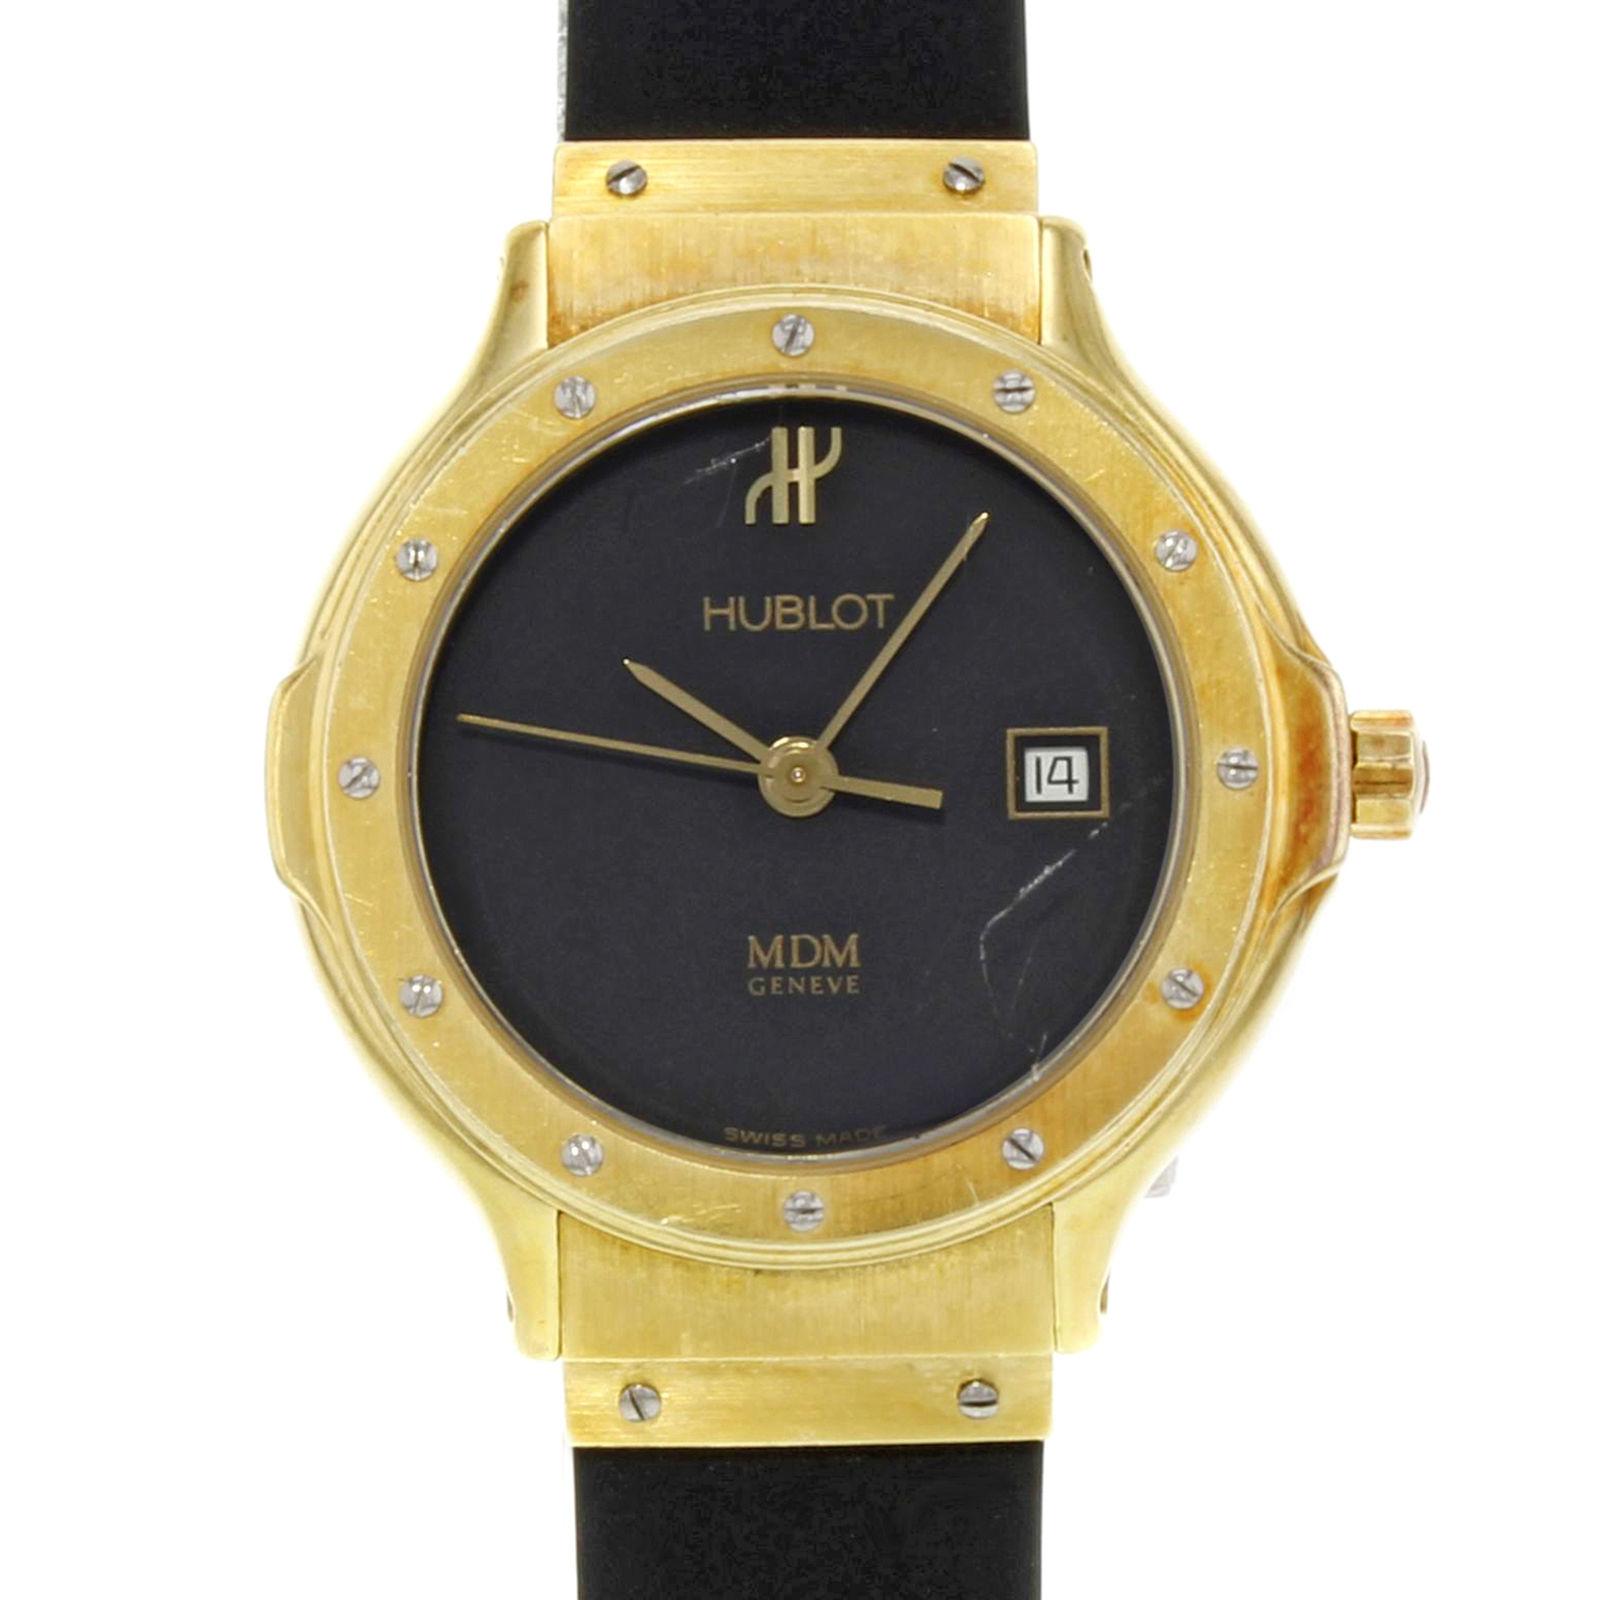 (32776)

This pre-owned Hublot MDM 1391.3 is a beautiful Ladies timepiece that is powered by a quartz movement which is cased in a yellow gold case. It has a round shape face, date dial and has hand unspecified style markers. It is completed with a